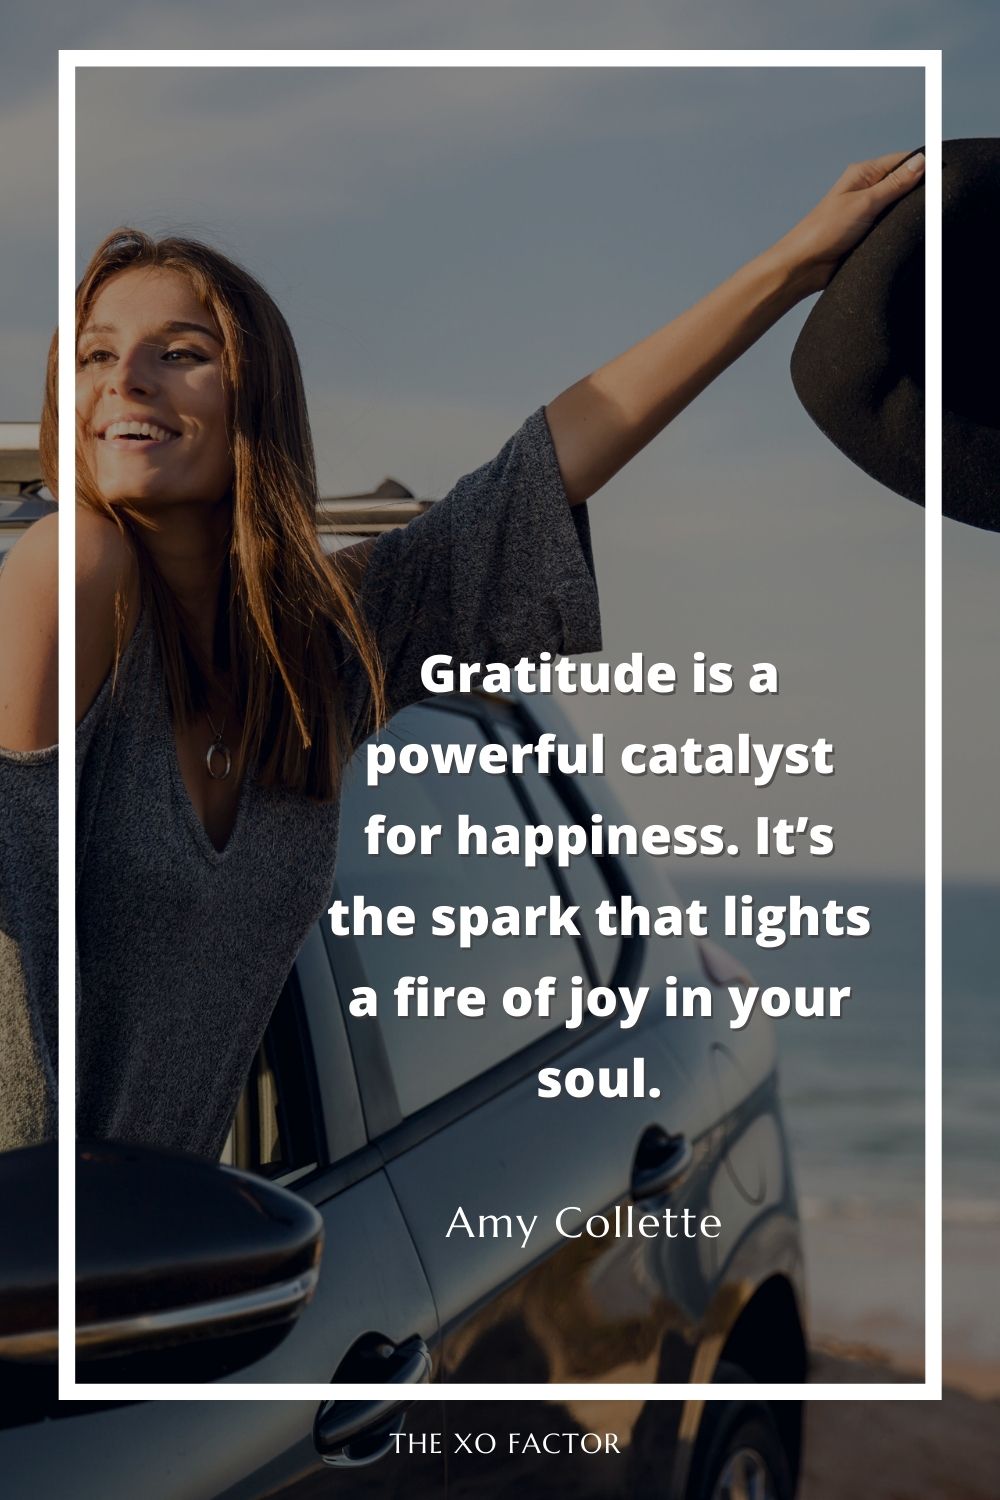 Gratitude is a powerful catalyst for happiness. It’s the spark that lights a fire of joy in your soul. Gratitude quotes